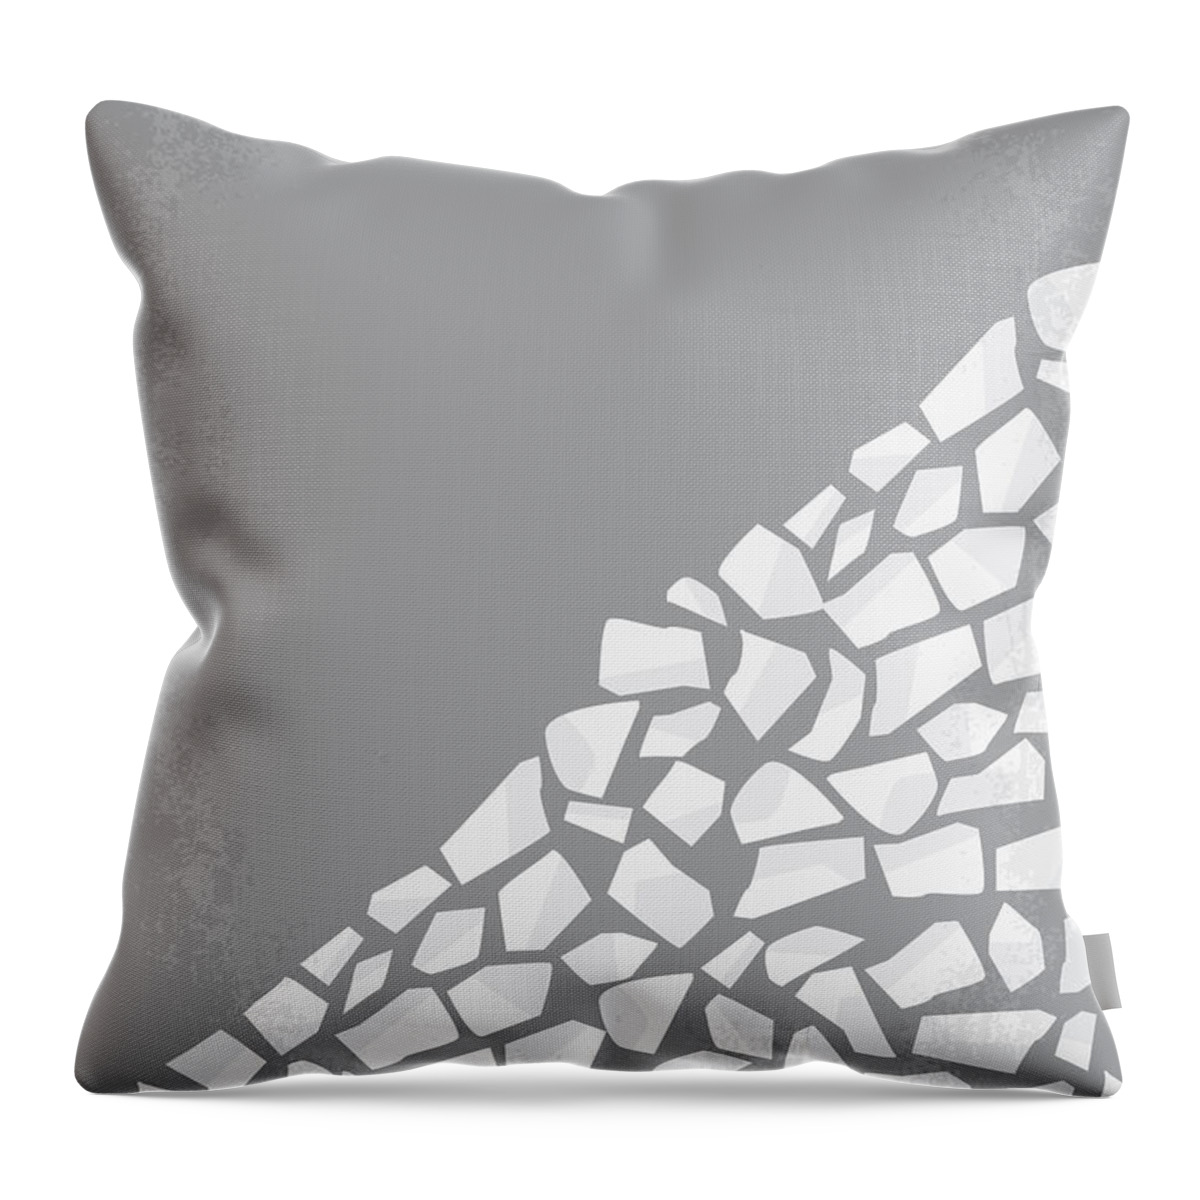 Hill Throw Pillow featuring the digital art No091 My The Hill minimal movie poster by Chungkong Art